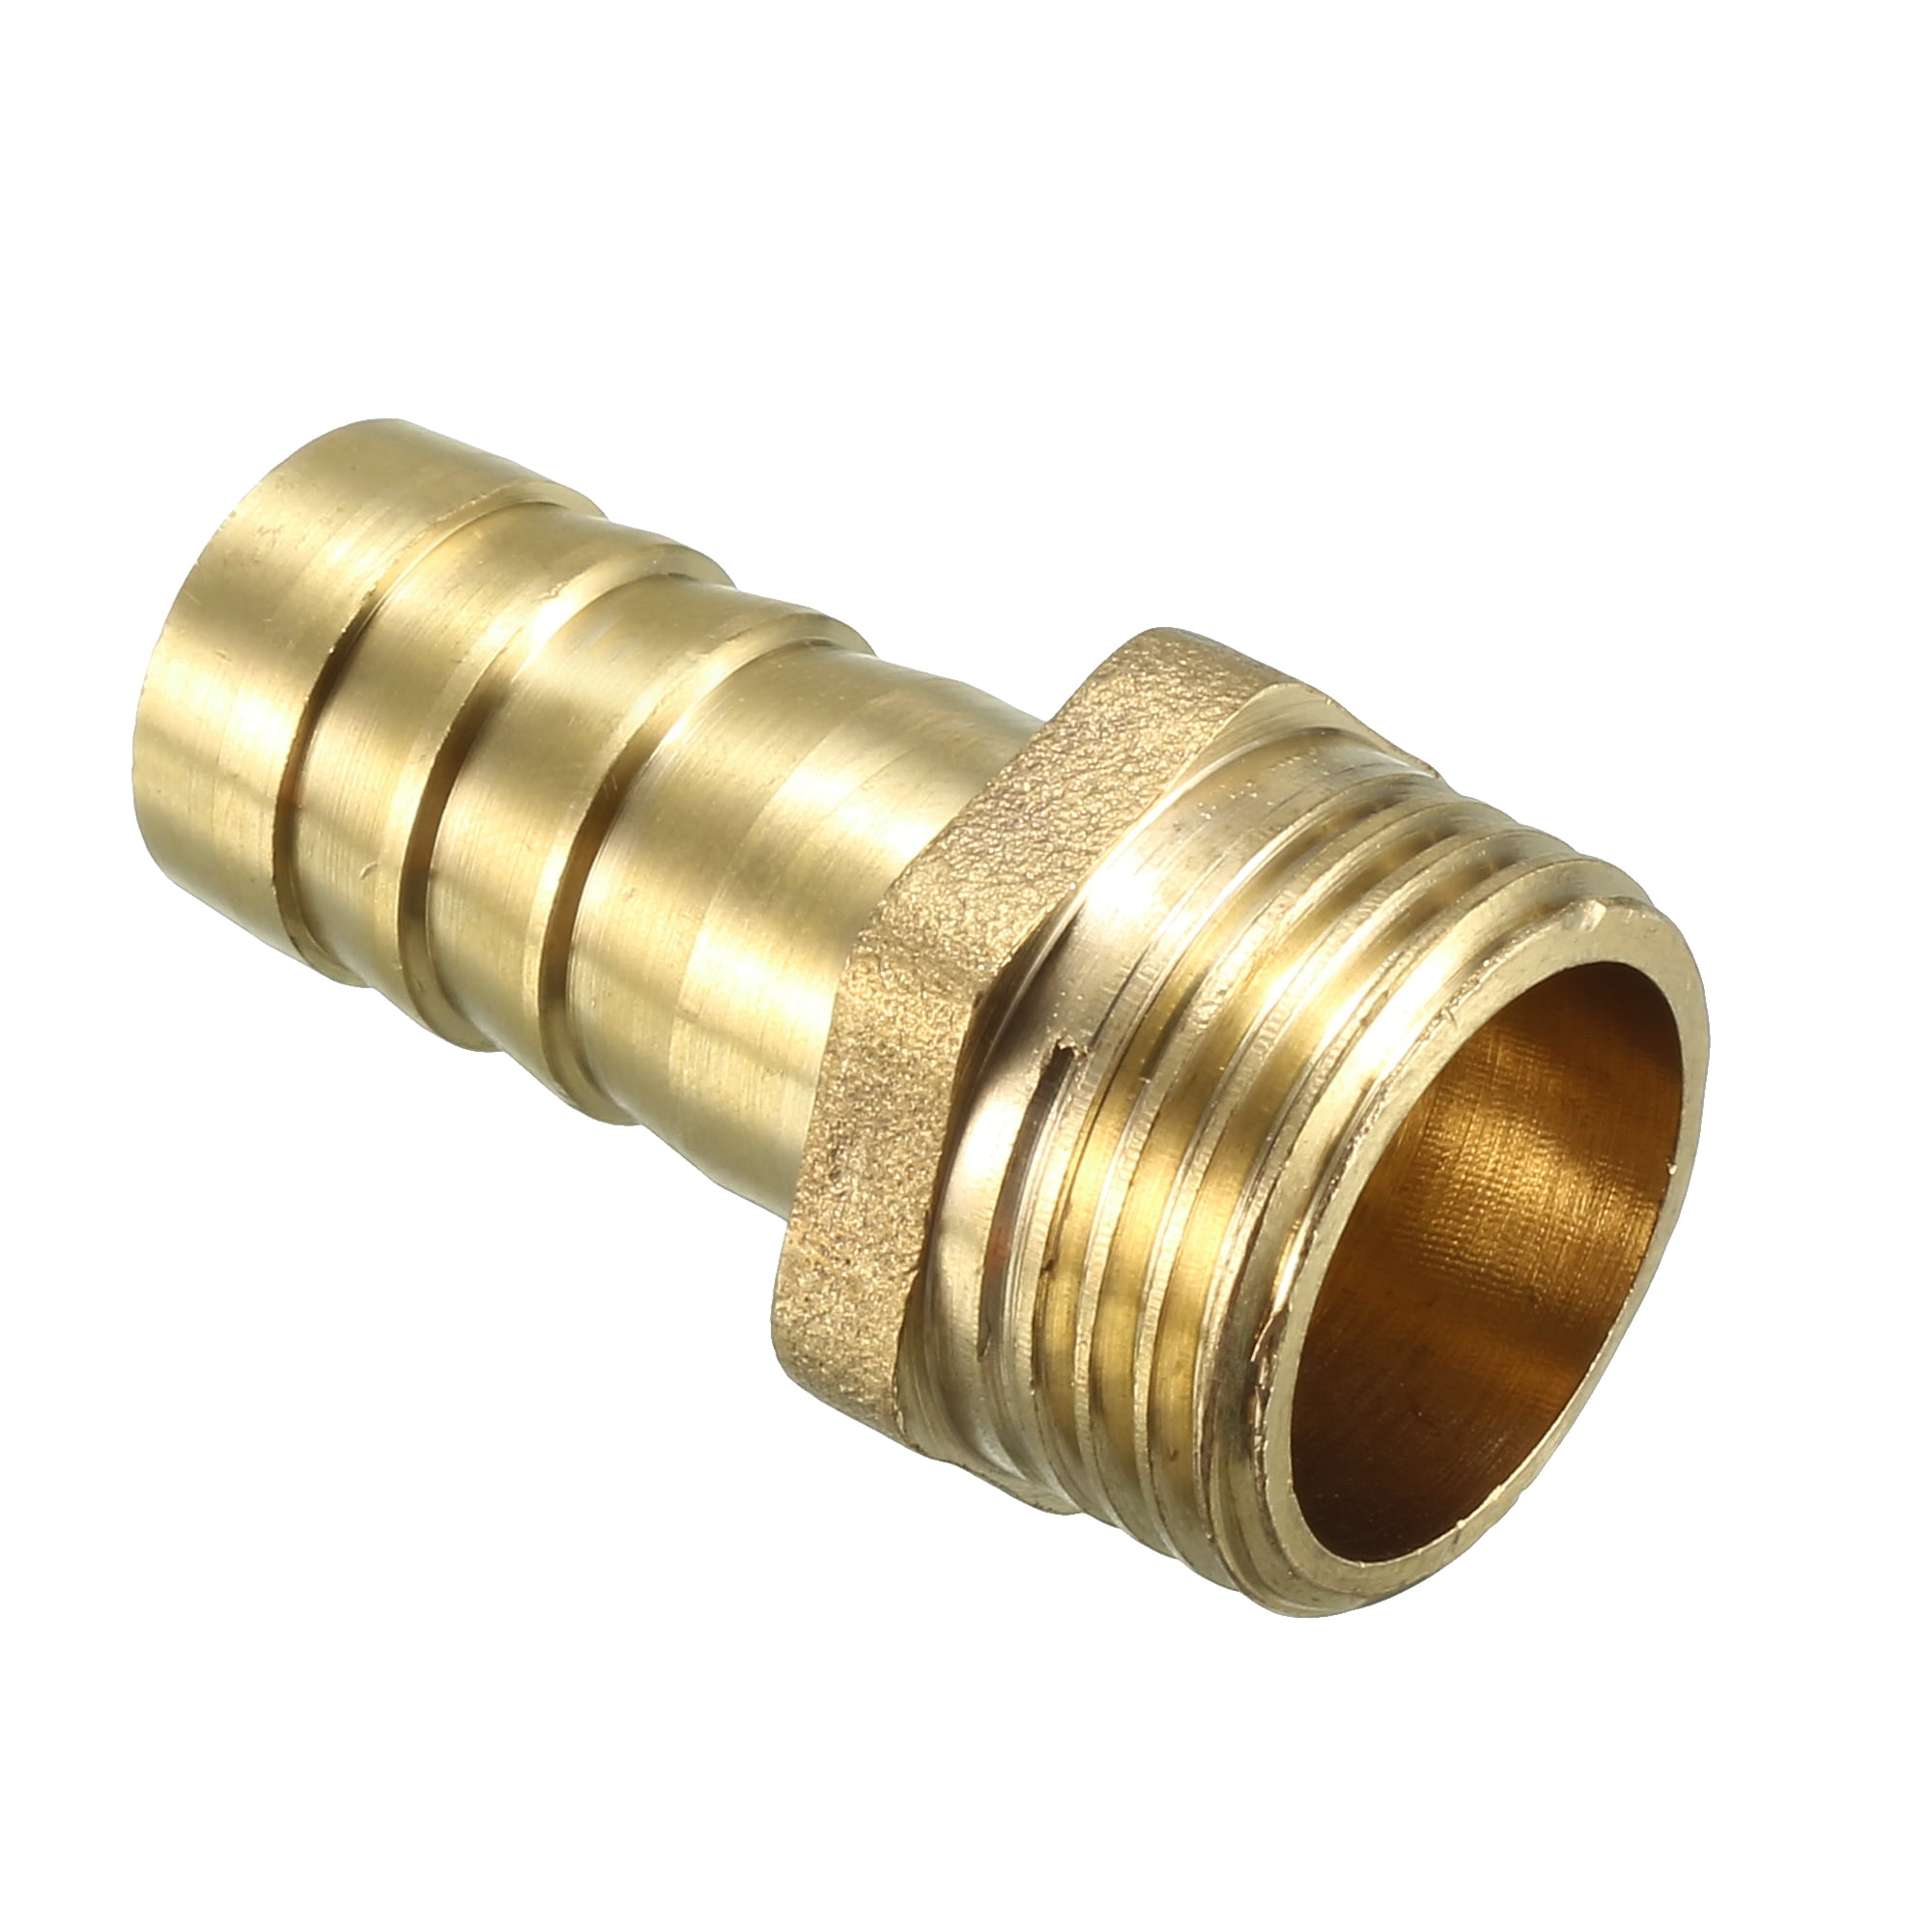 Details about   3/4" X 1/2" Yellow Brass Pipe Bushing 